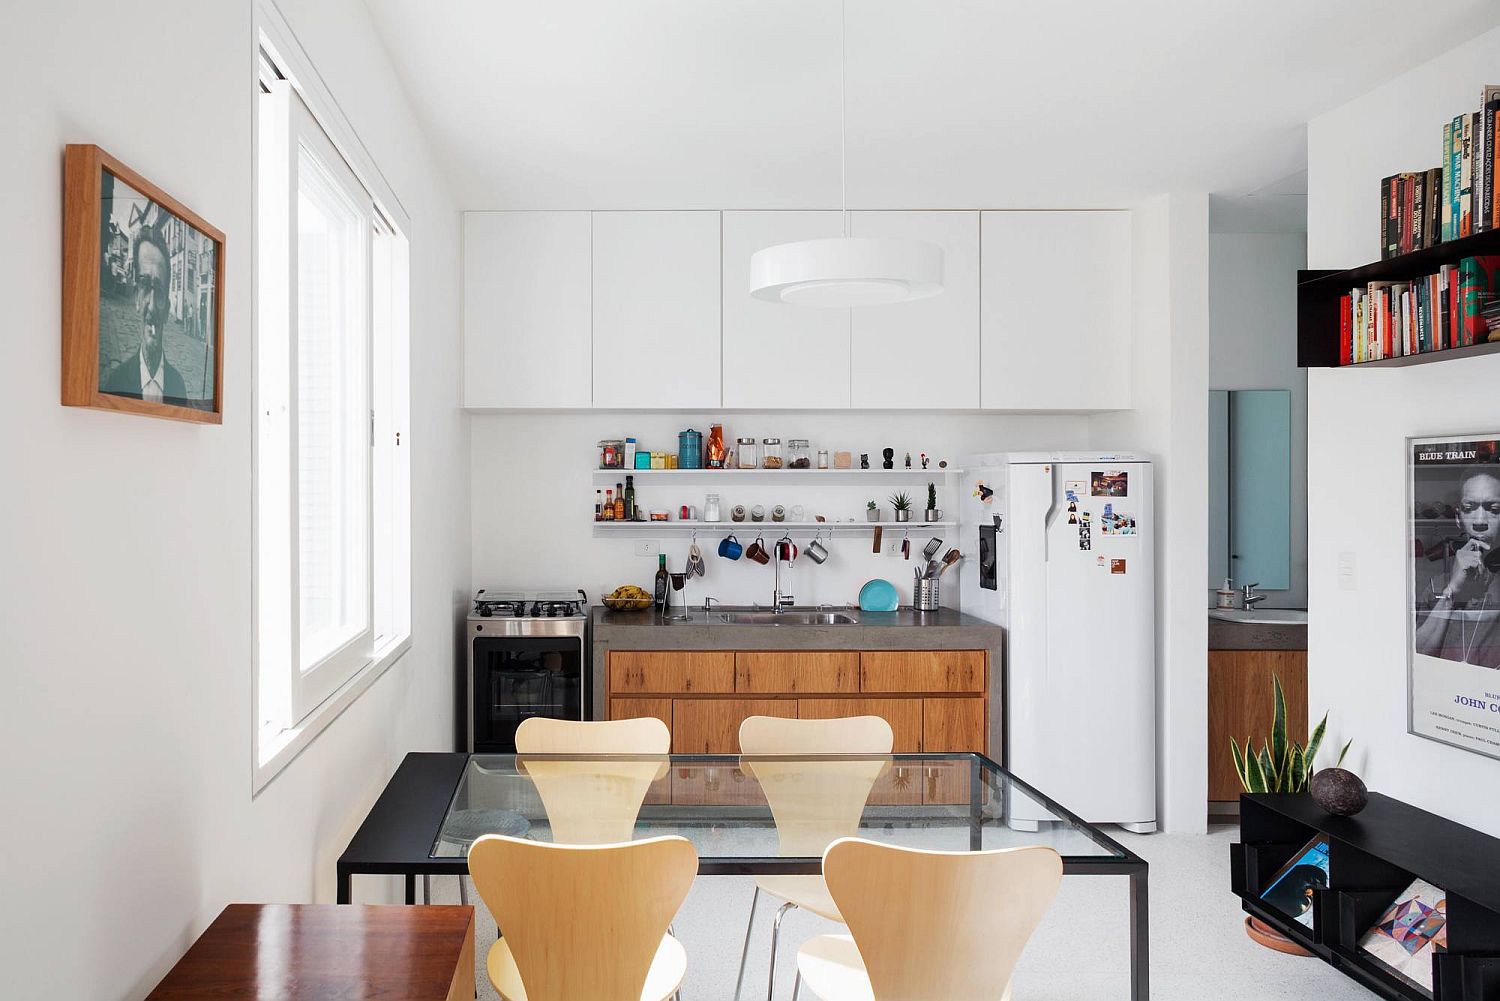 50 Tiny Apartment Kitchens That Excel At Maximizing Small Spaces,Graphic Designer Wage